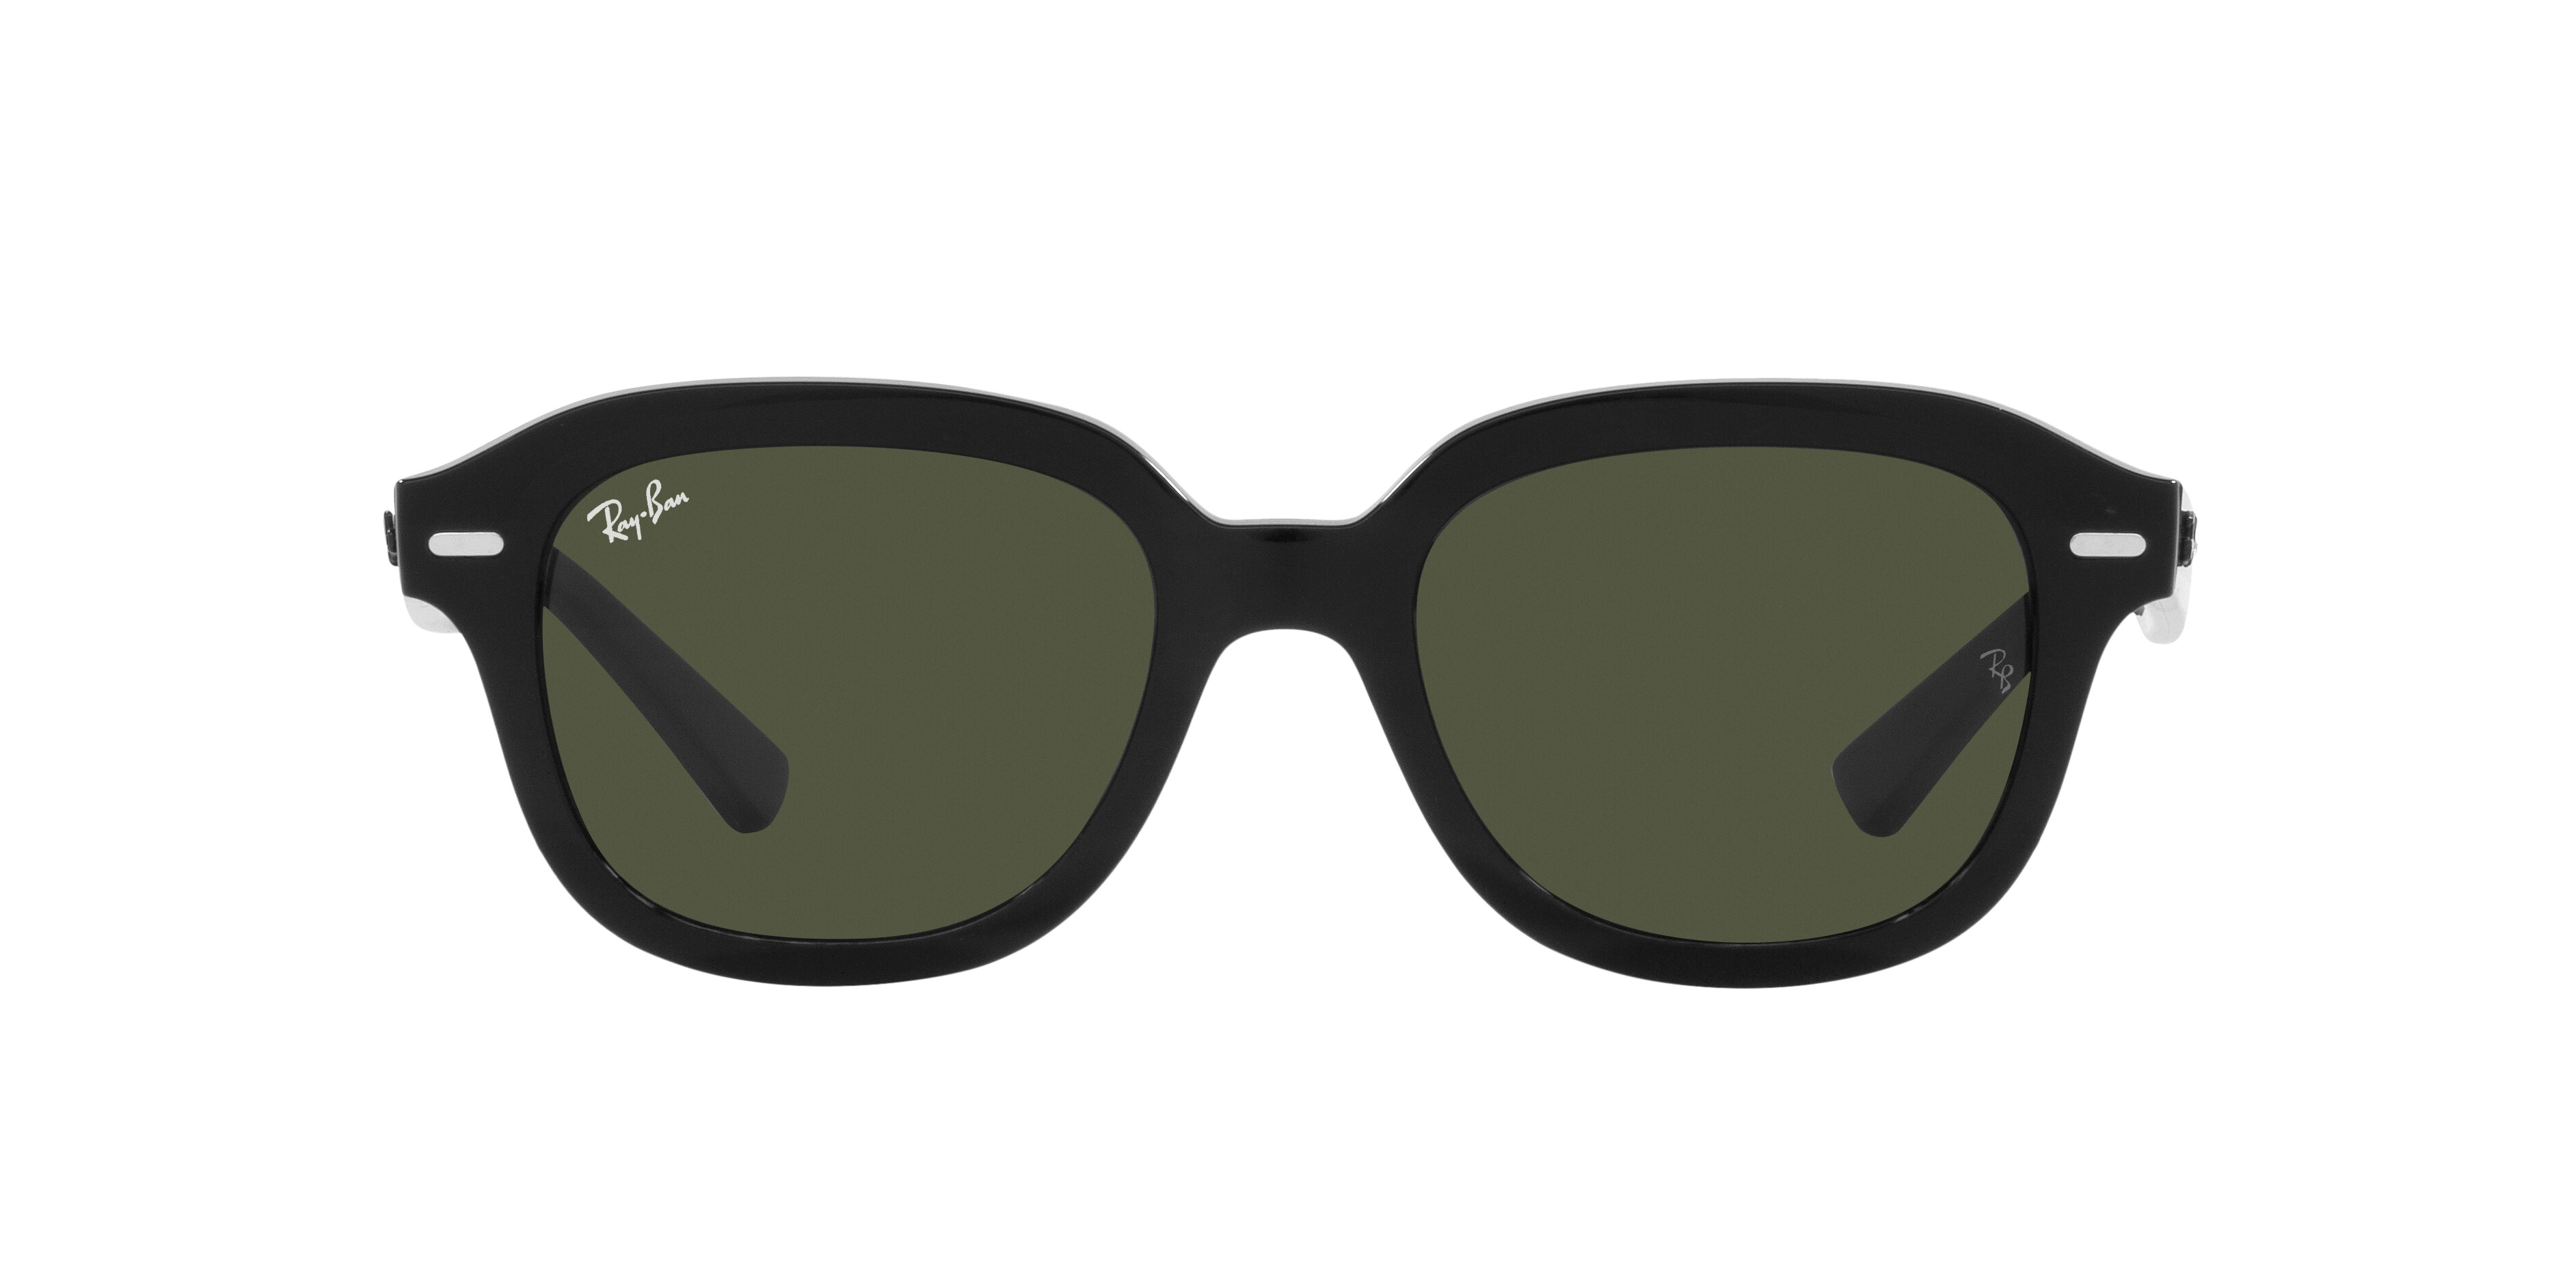 [products.image.front] Ray-Ban ERIK 0RB4398 901/31 Sonnenbrille